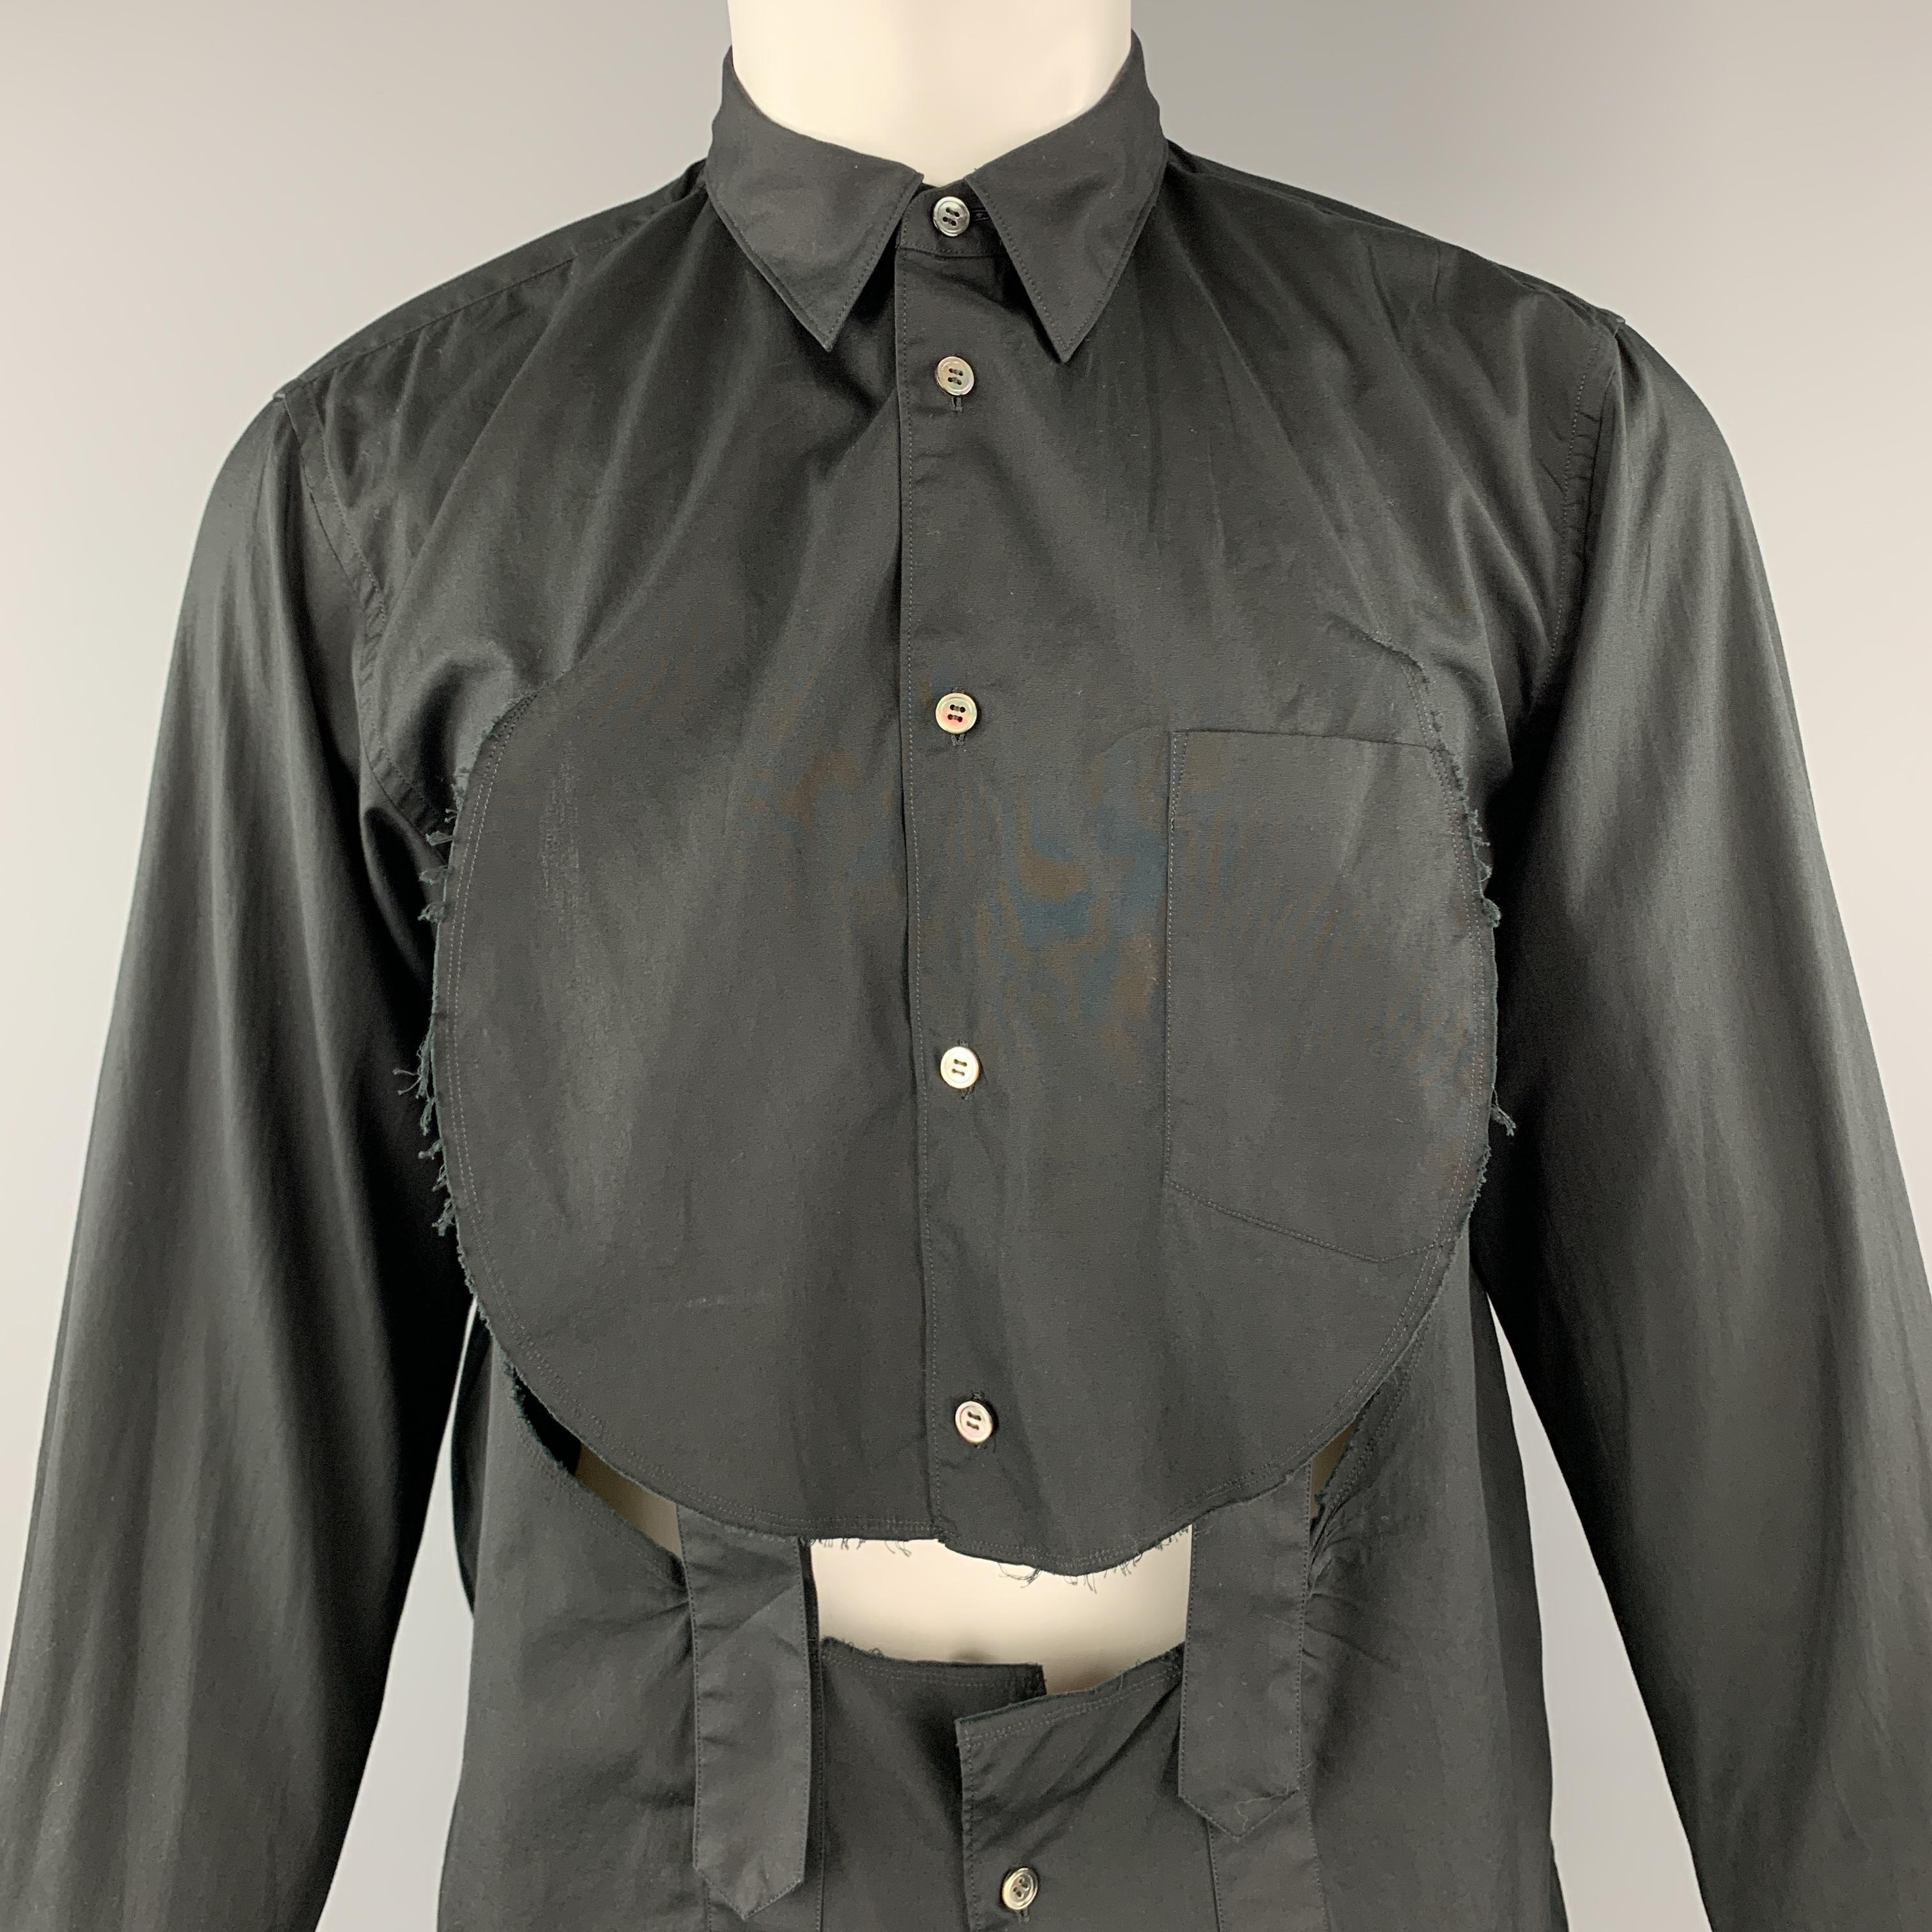 COMME DES GARCONS HOMME PLUS shirt comes in black cotton with a pointed collar, circle cutout flap front with bondage straps and a patch pocket. Made in Japan.

New with Tags.
Marked: M  AD 2018

Measurements:

Shoulder: 18 in.
Chest: 44 in.
Sleeve: